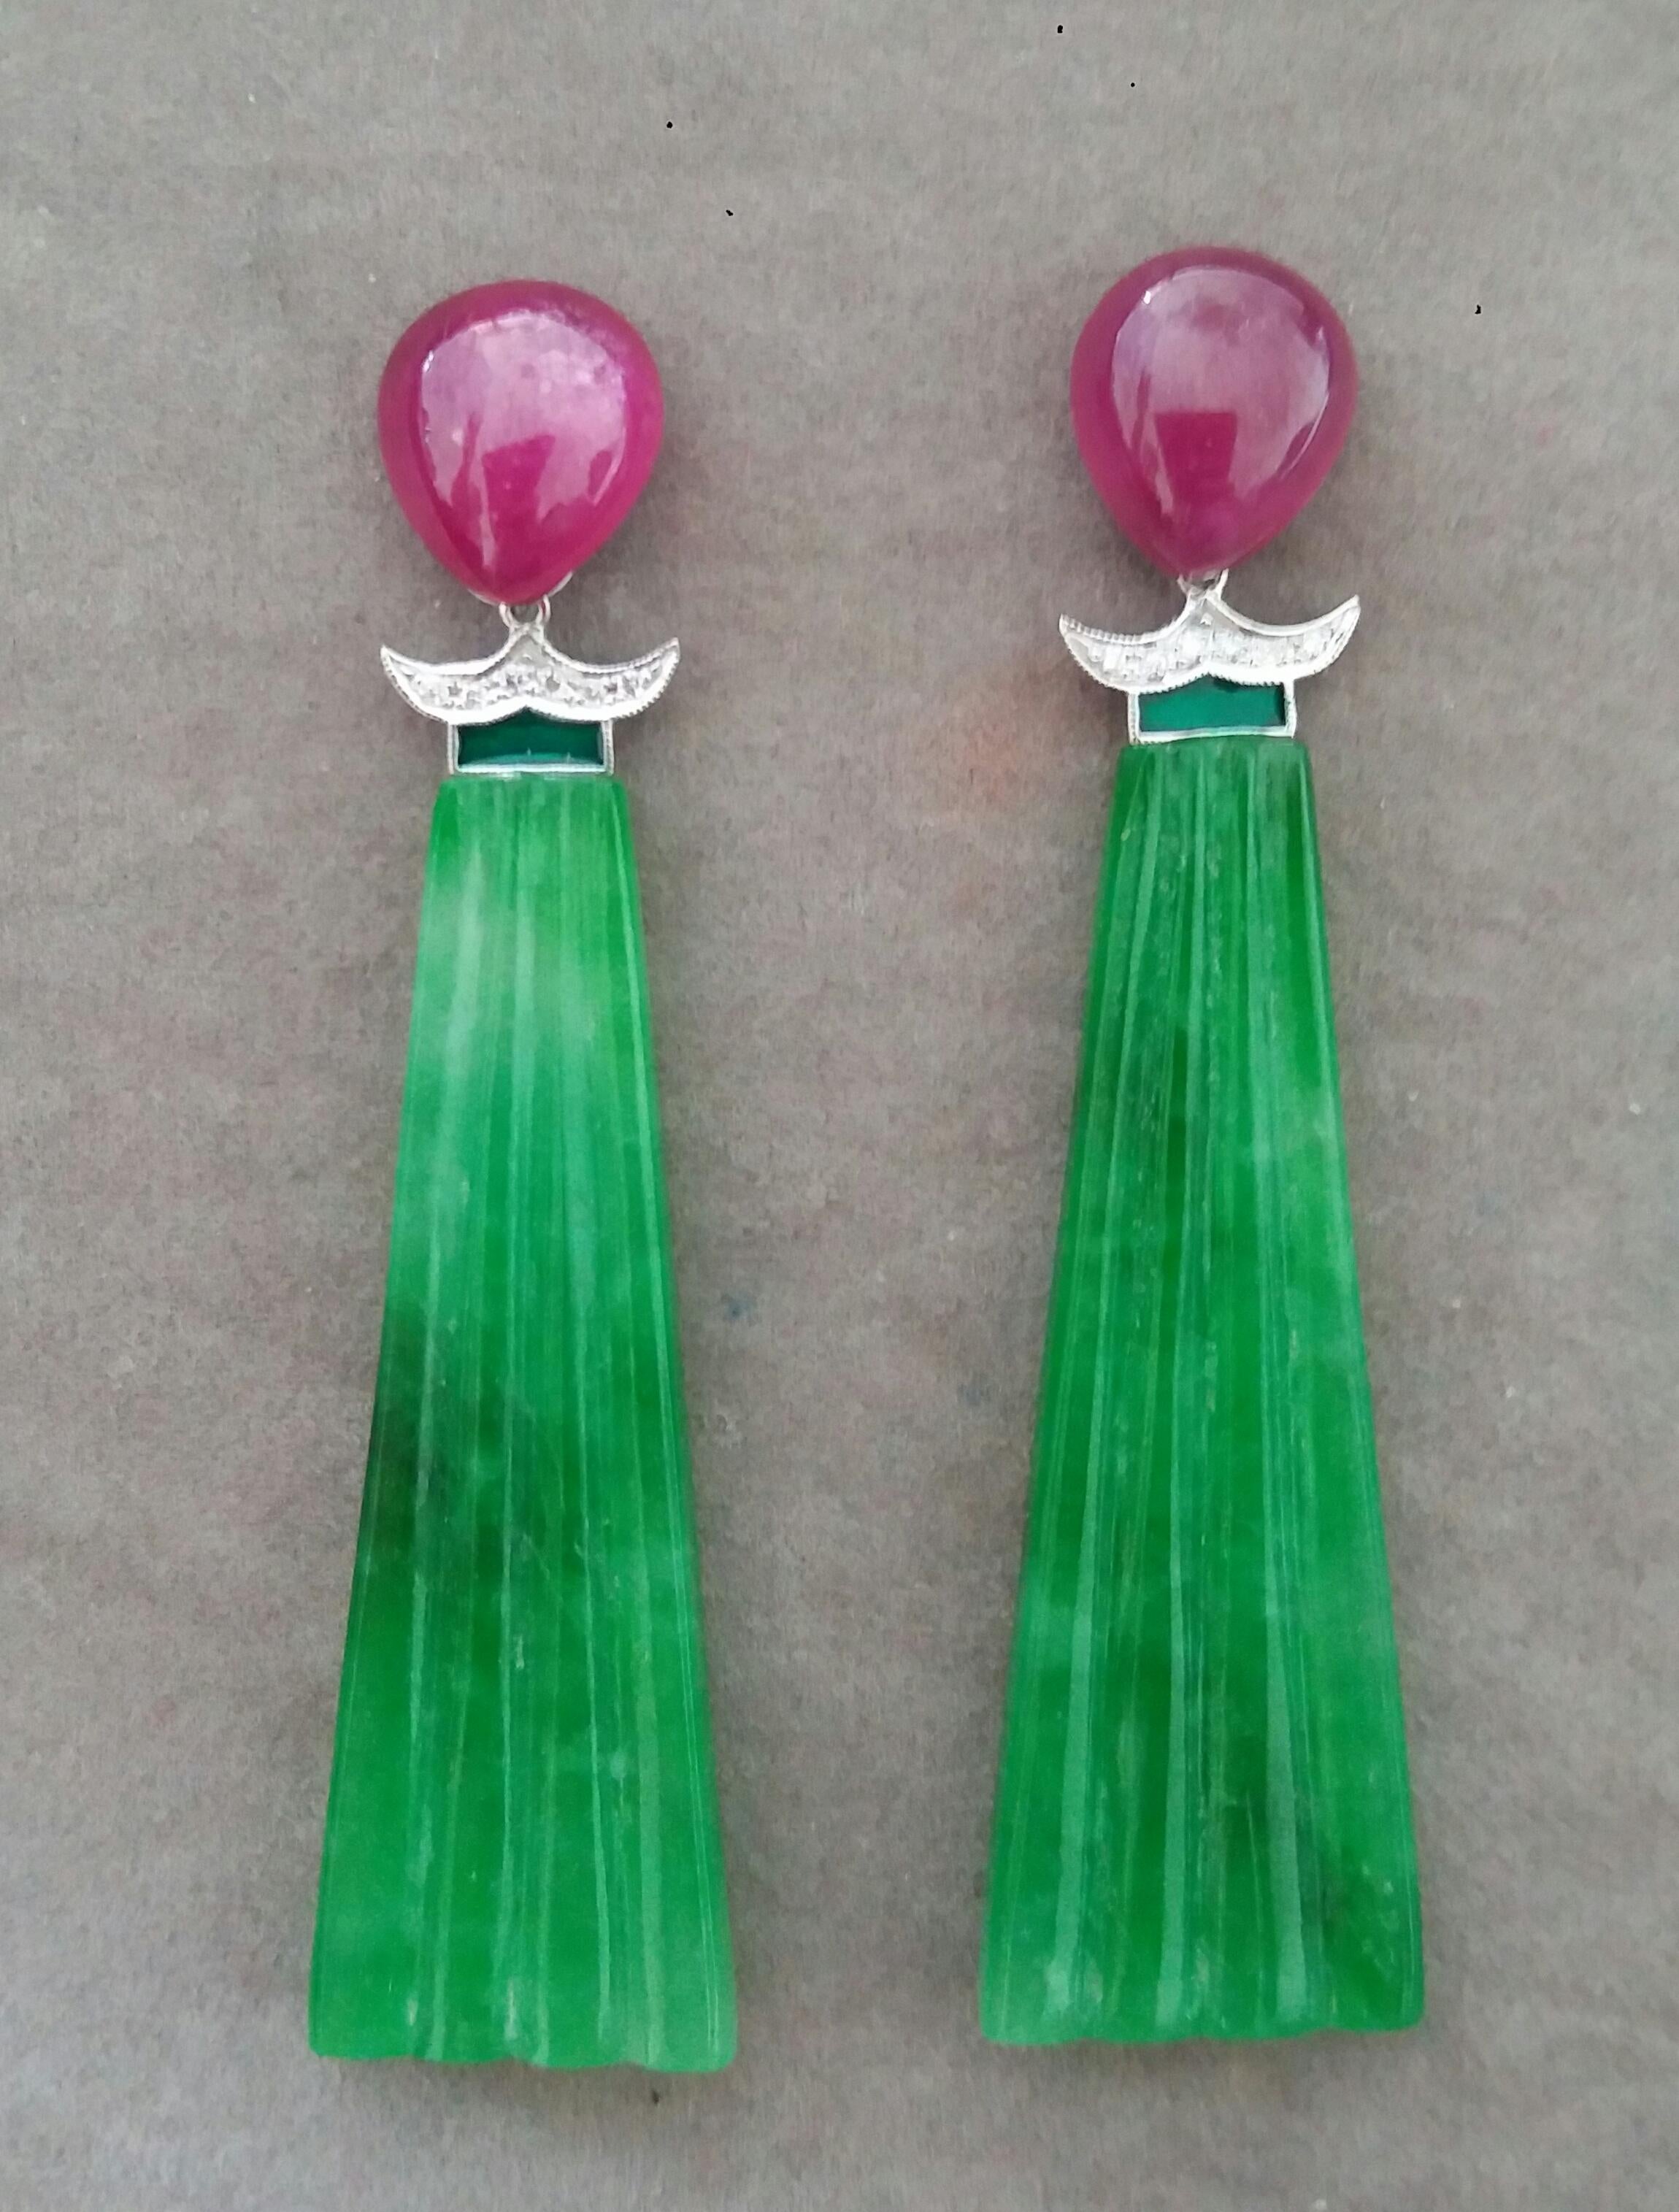 The tops are 2 Ruby OvalPear Shape cabs measuring 10x12 mm ,middle parts are composed of 2 white gold elements with 14 round full cut diamonds and Green Enamel ,in the bottom parts we have 2 Engraved Jades 54 mm long and 14 mm wide.

In 1978 our